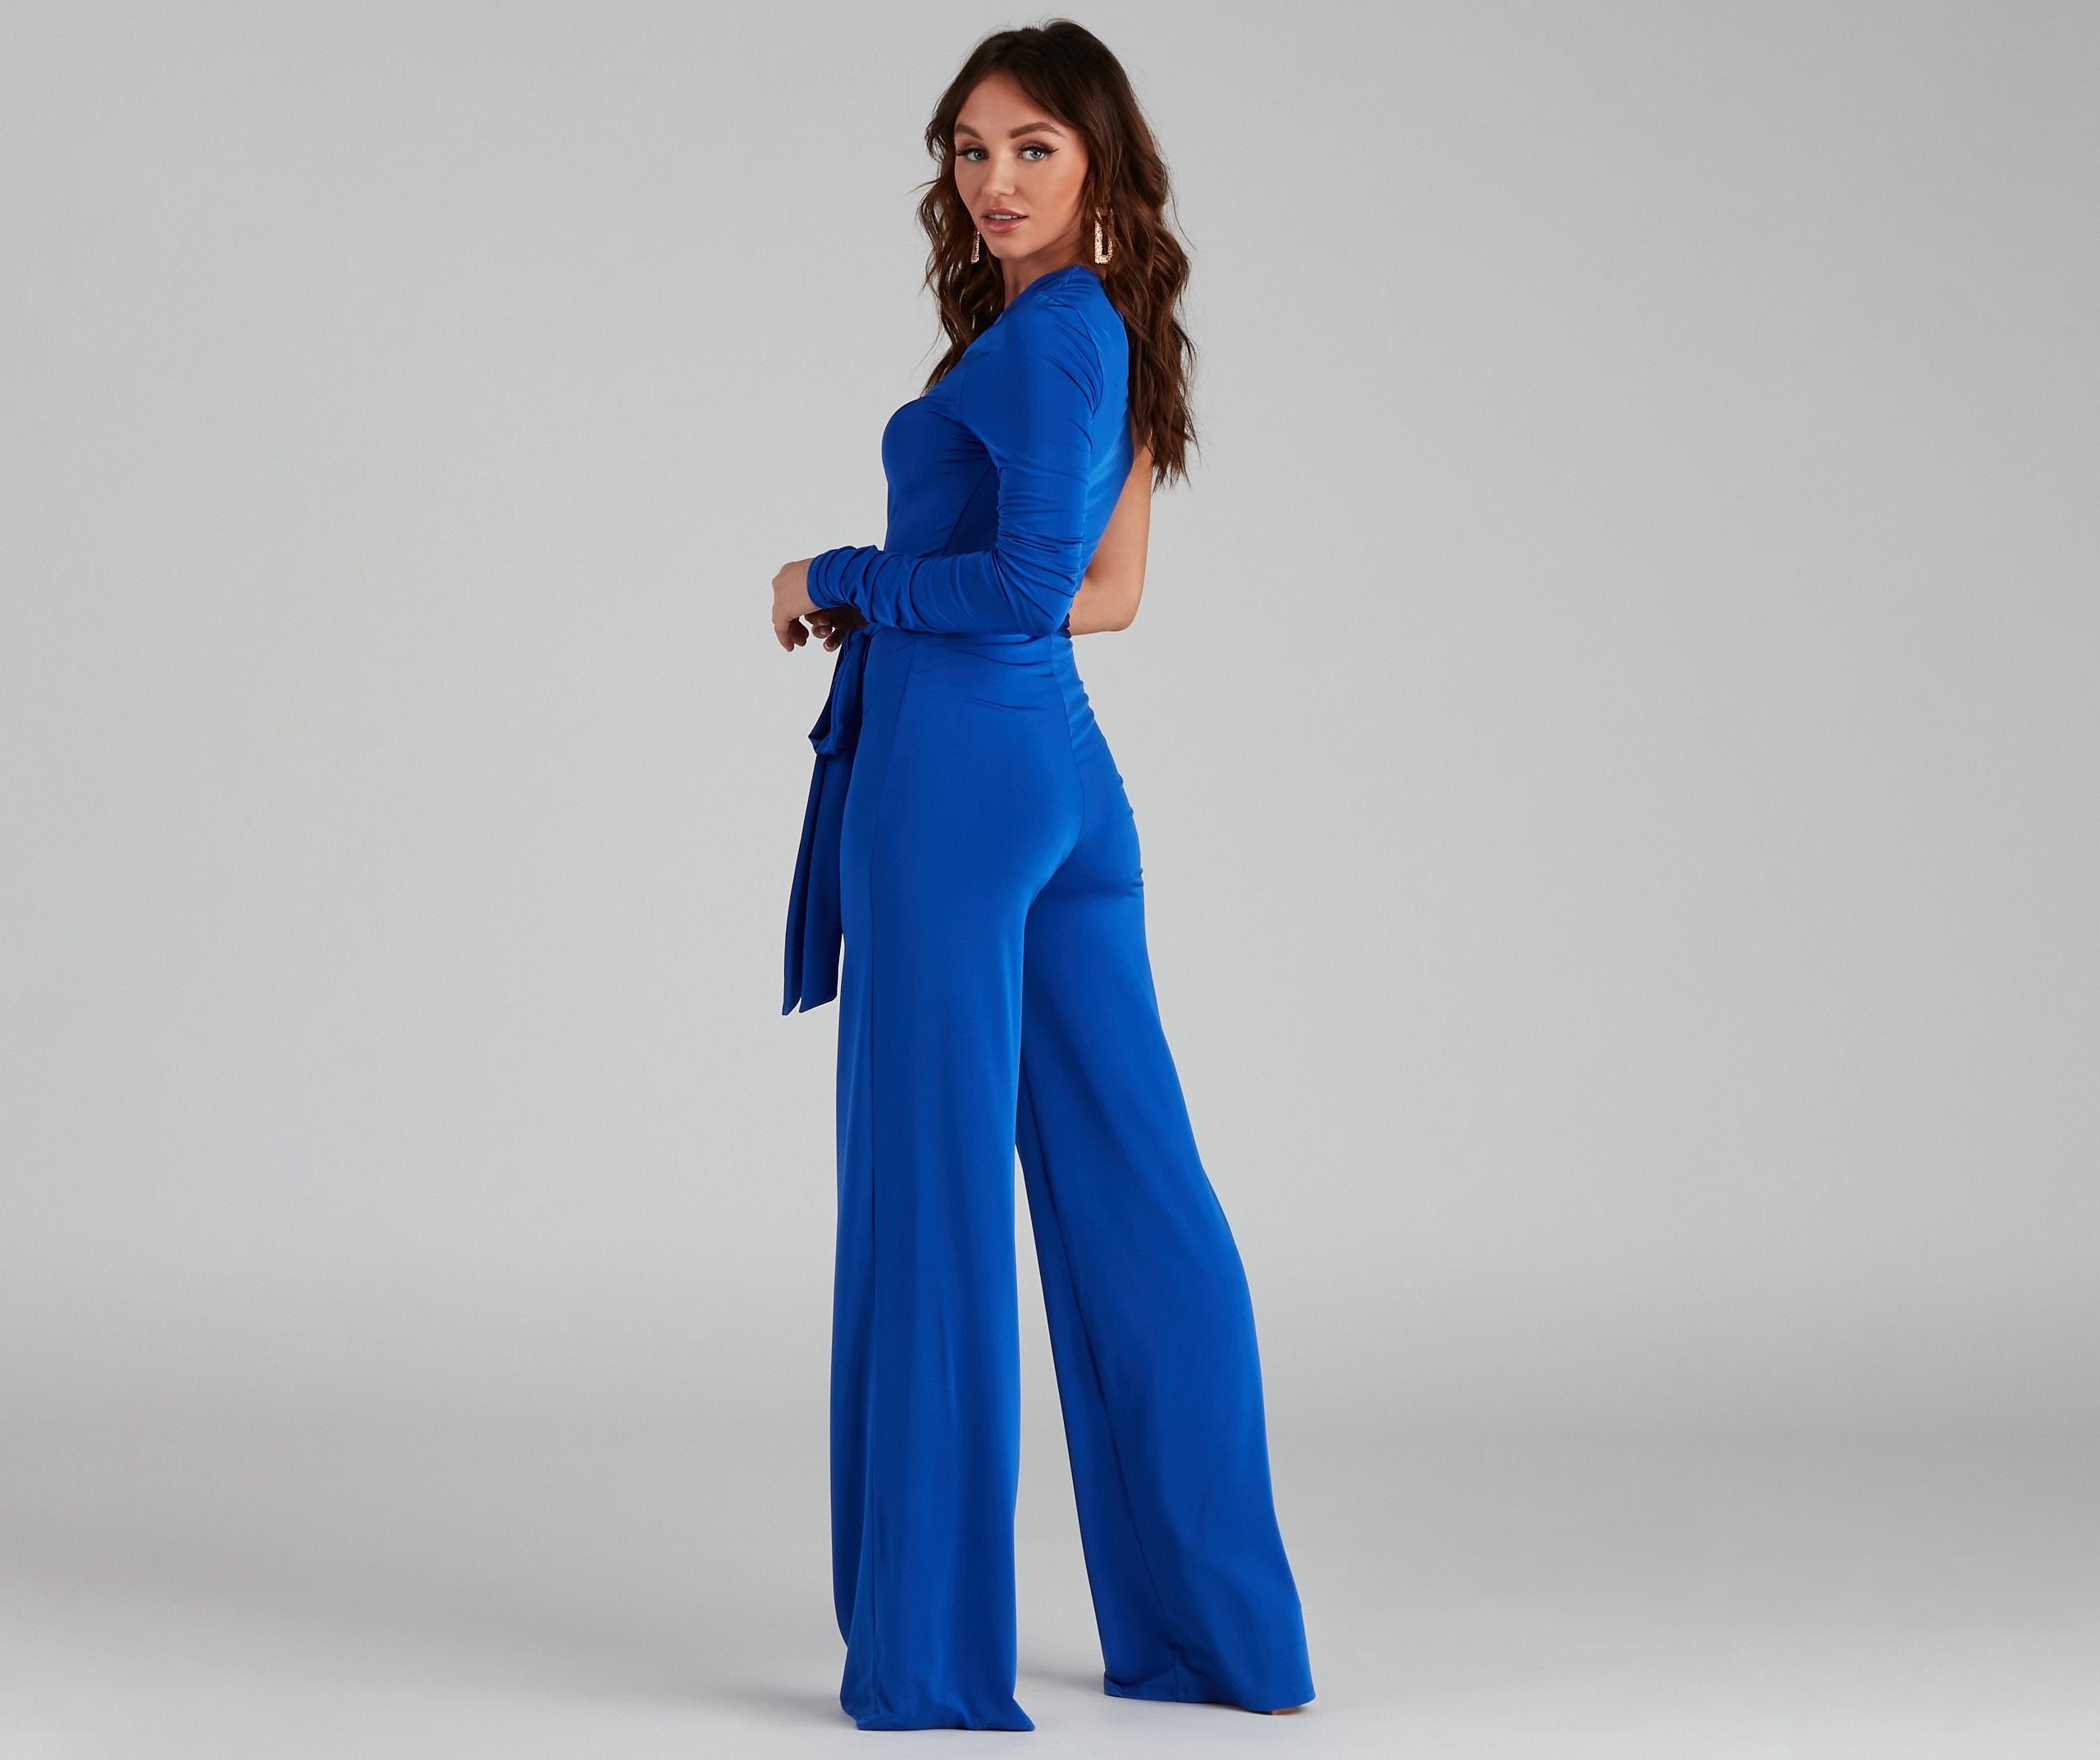 One Sided Tie-Waist Jumpsuit - Lady Occasions